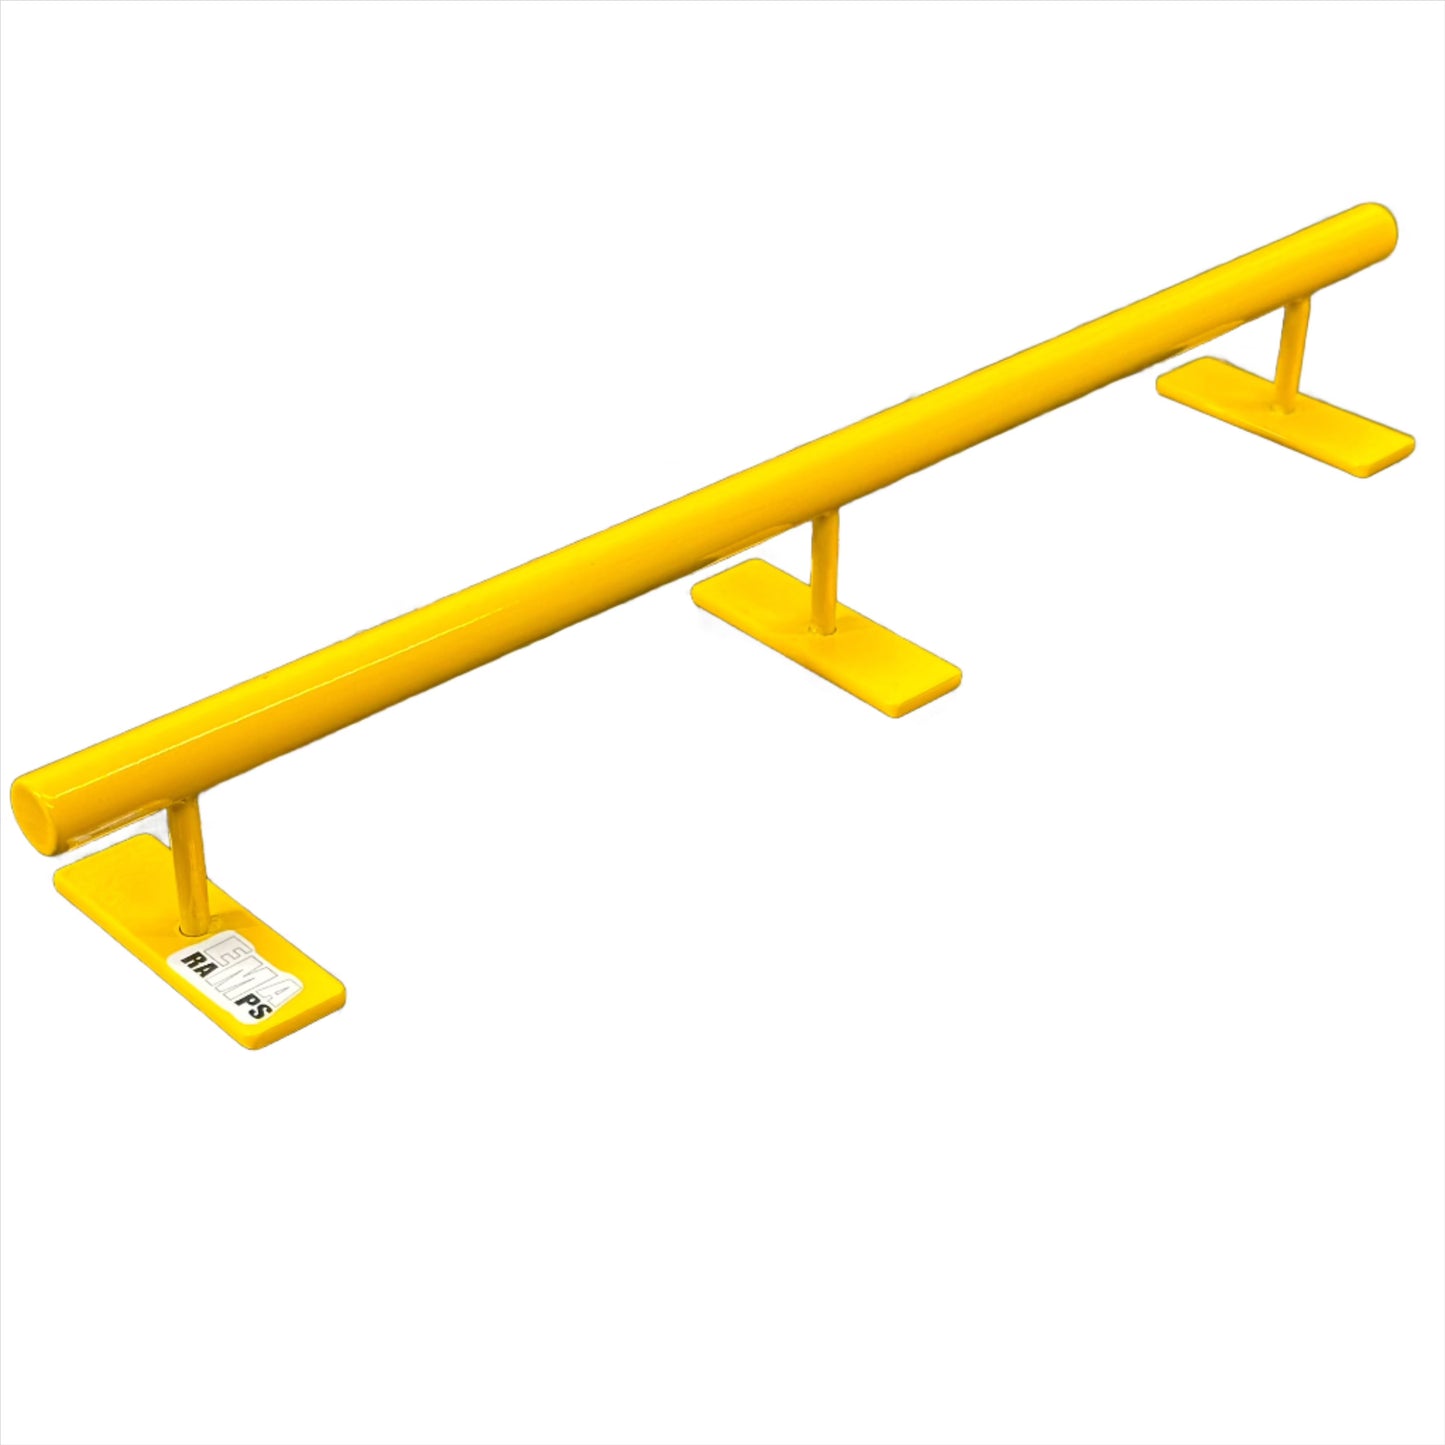 EMA BIG XL Yellow Round Rail Fingerboard Obstacle